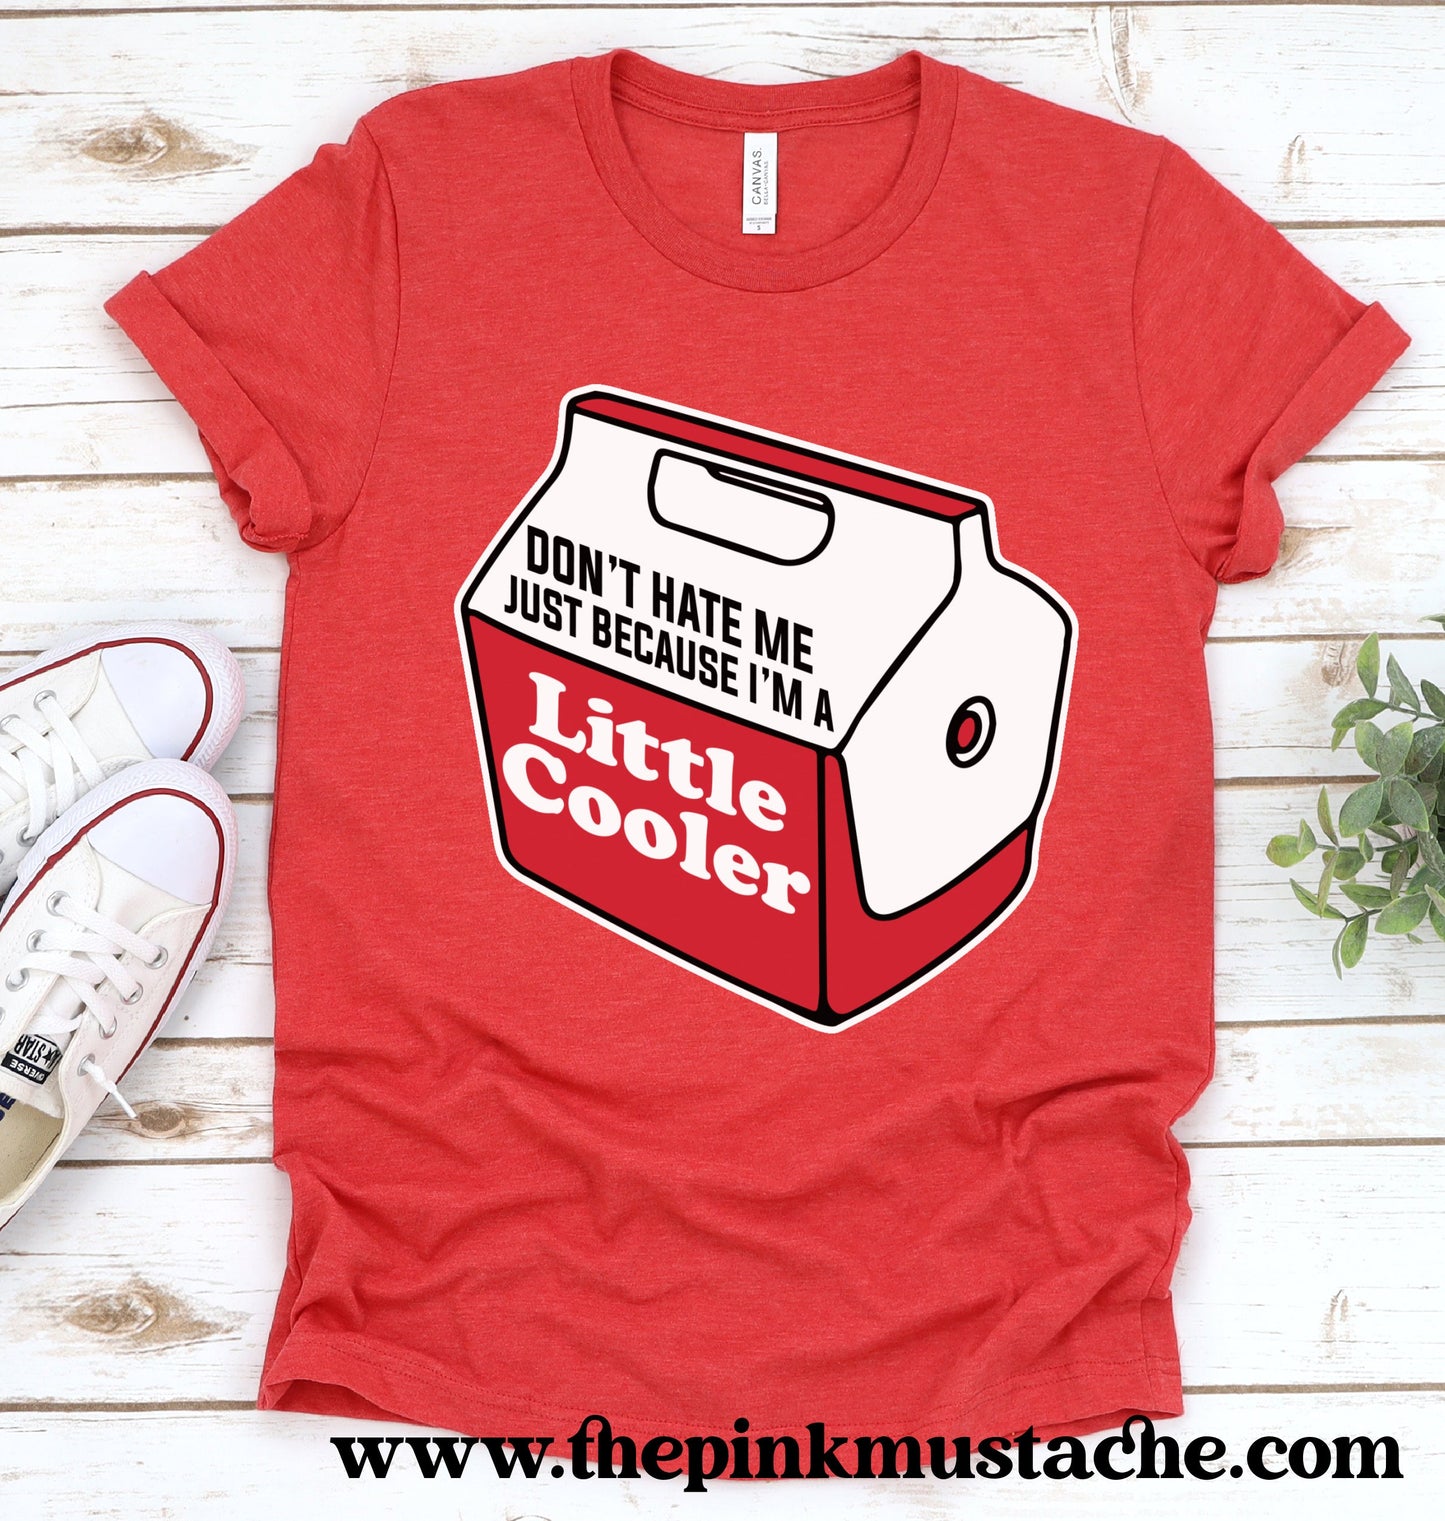 Don't Hate Me Just Because I'm A Little Cooler Tee/ Unisex Sized Shirt/ Youth and Adult Size